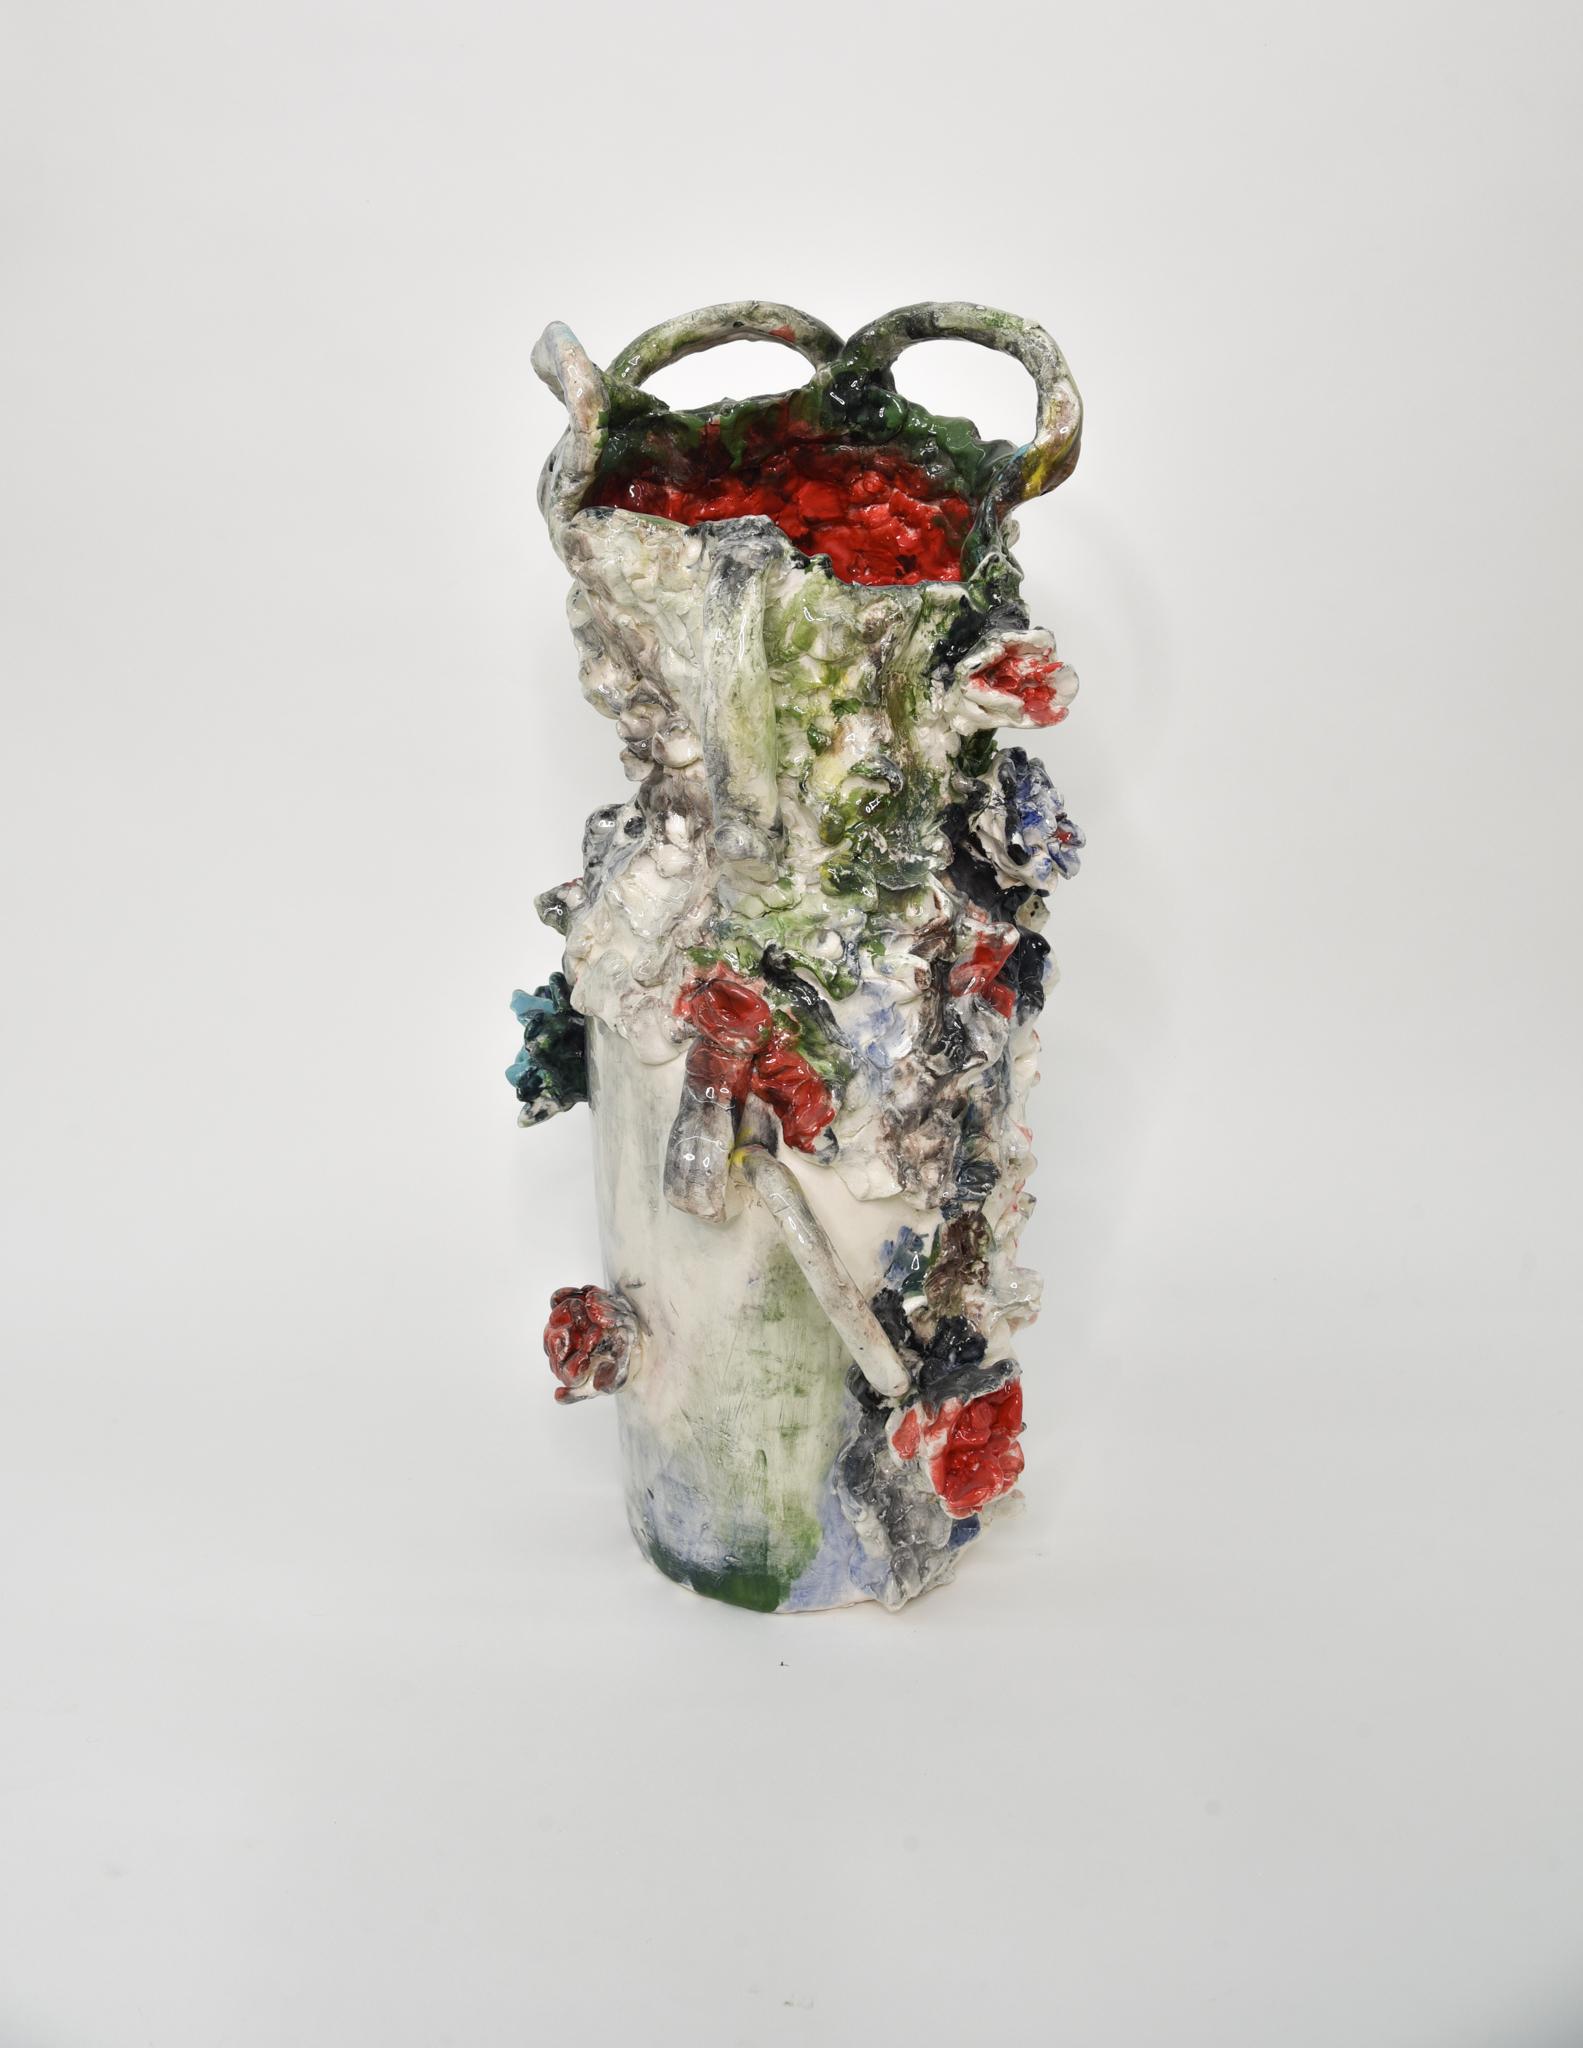 Untitled. Glazed ceramic abstract sculpture - Sculpture by Charo Oquet